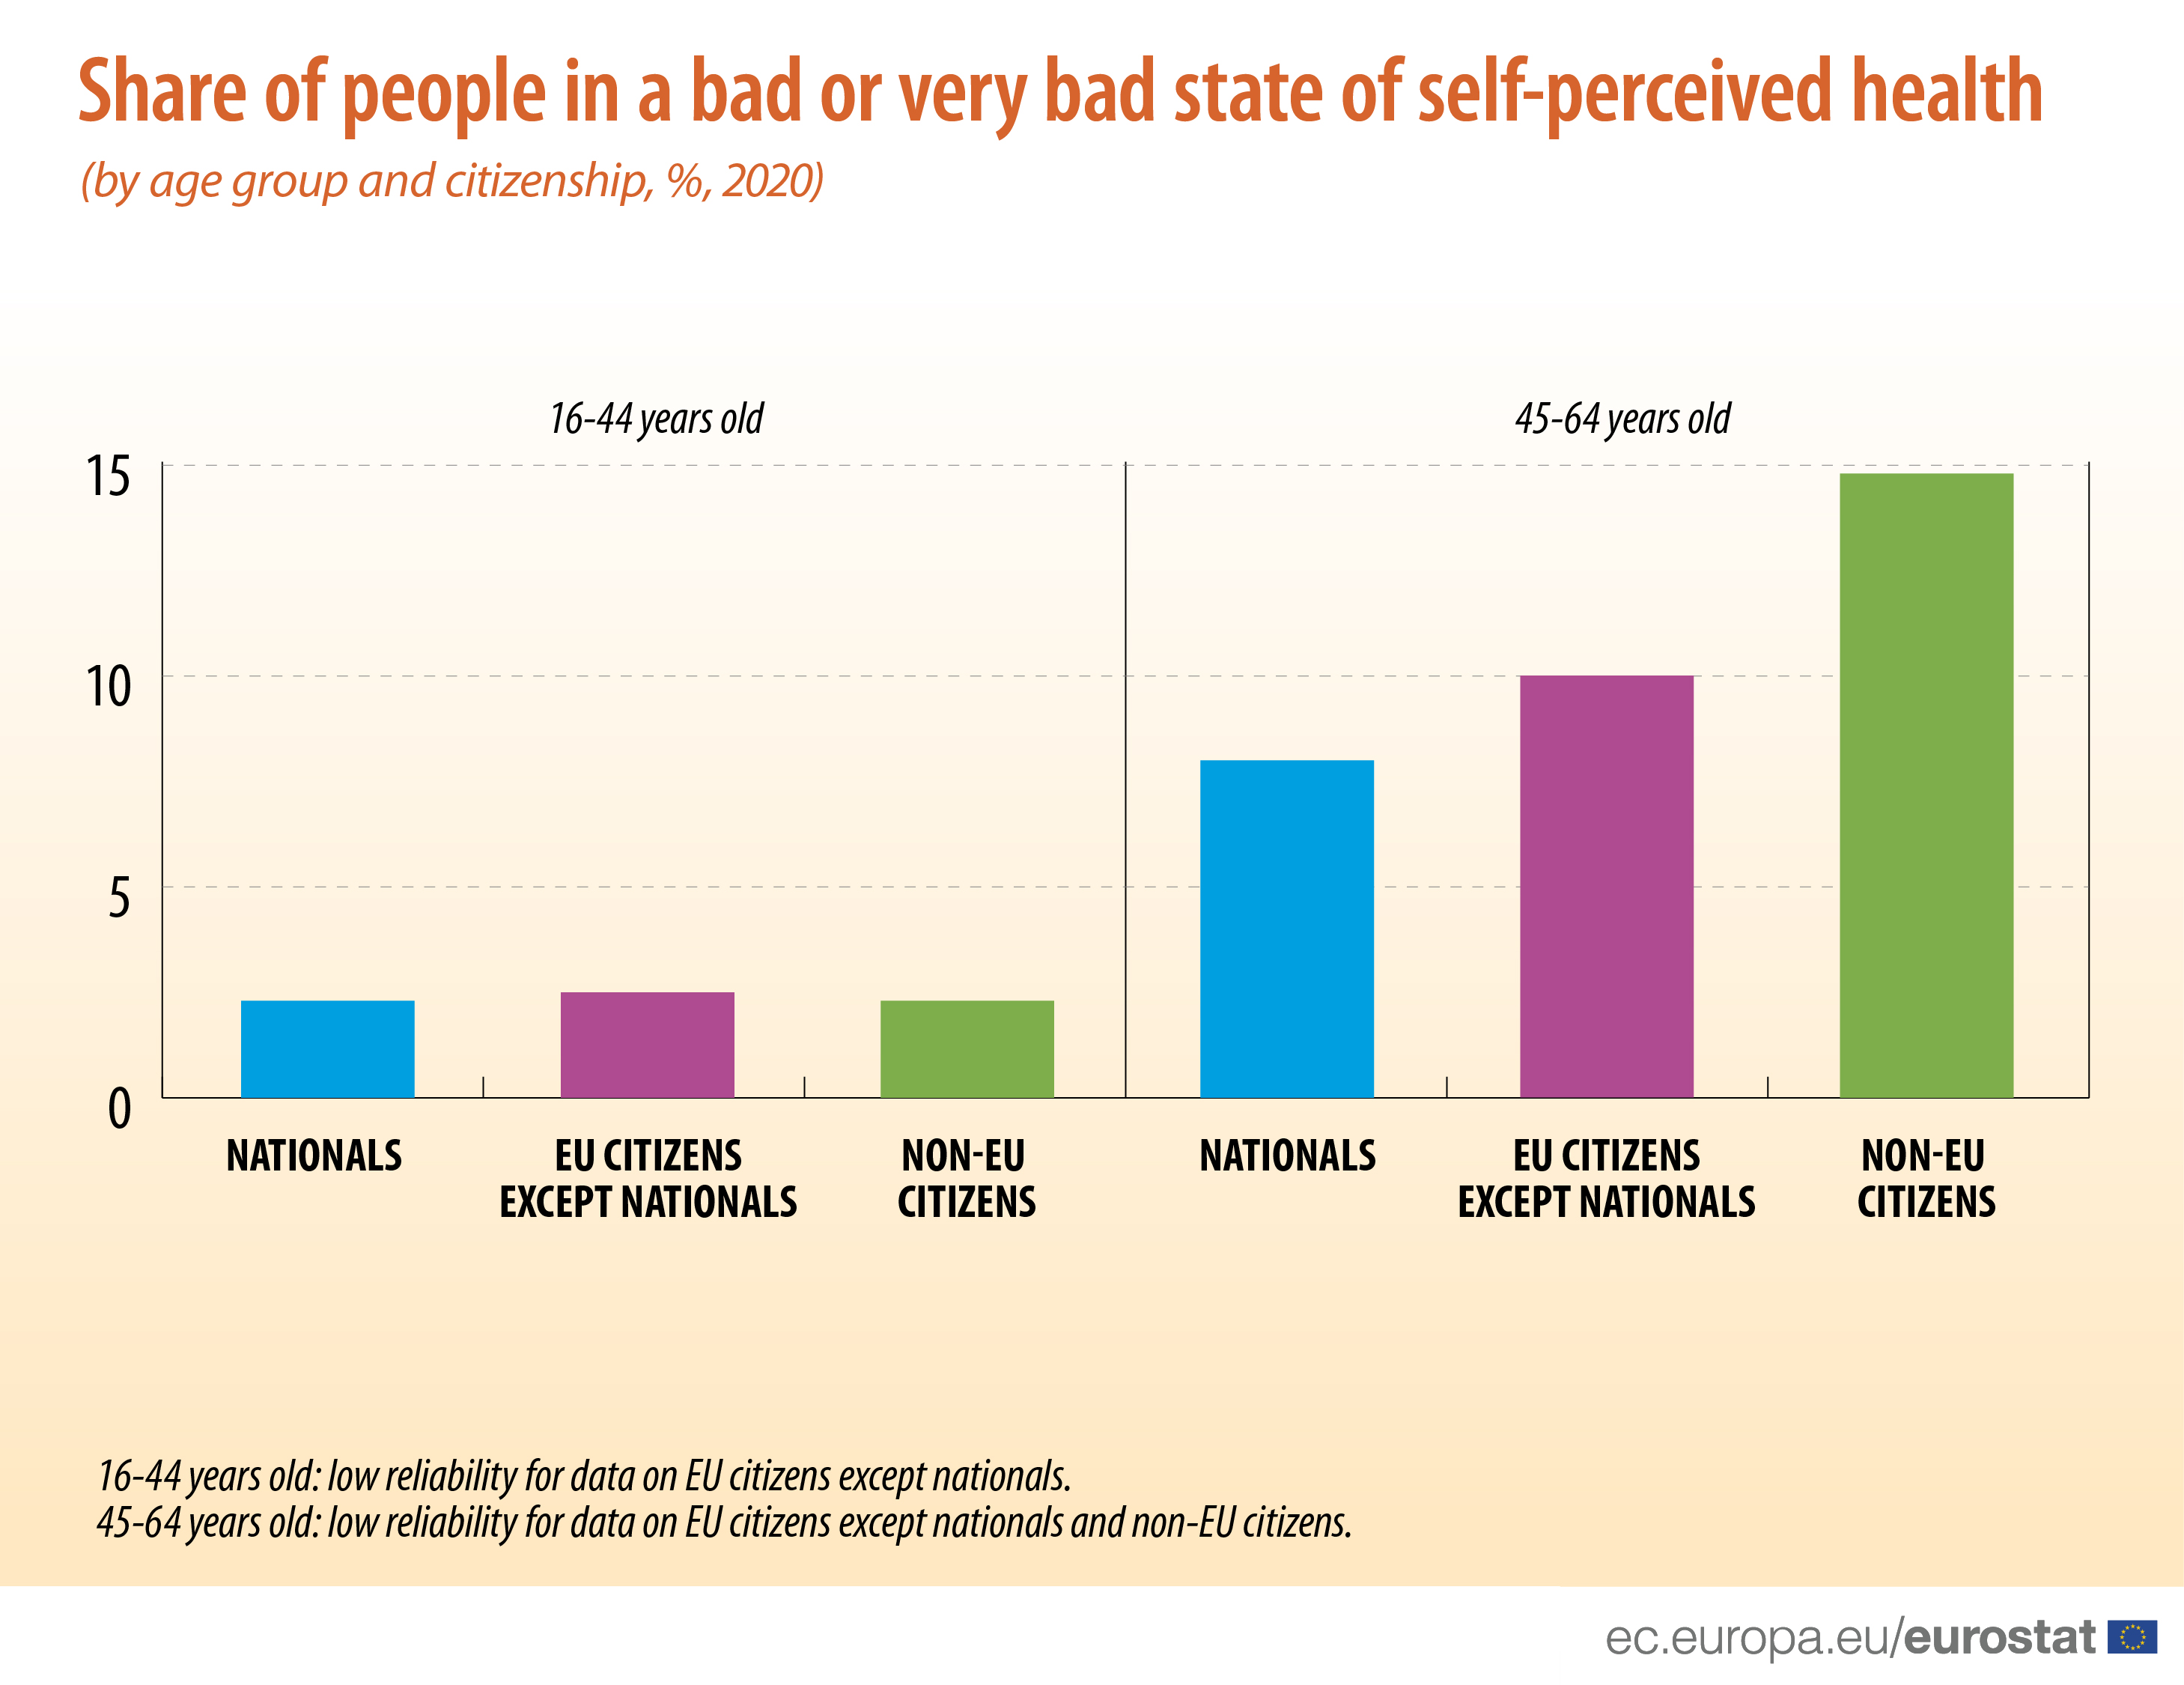 Bar graph: Share of people in a bad or very bad state of self-perceived health, by age group and citizenship, in %, in 2020